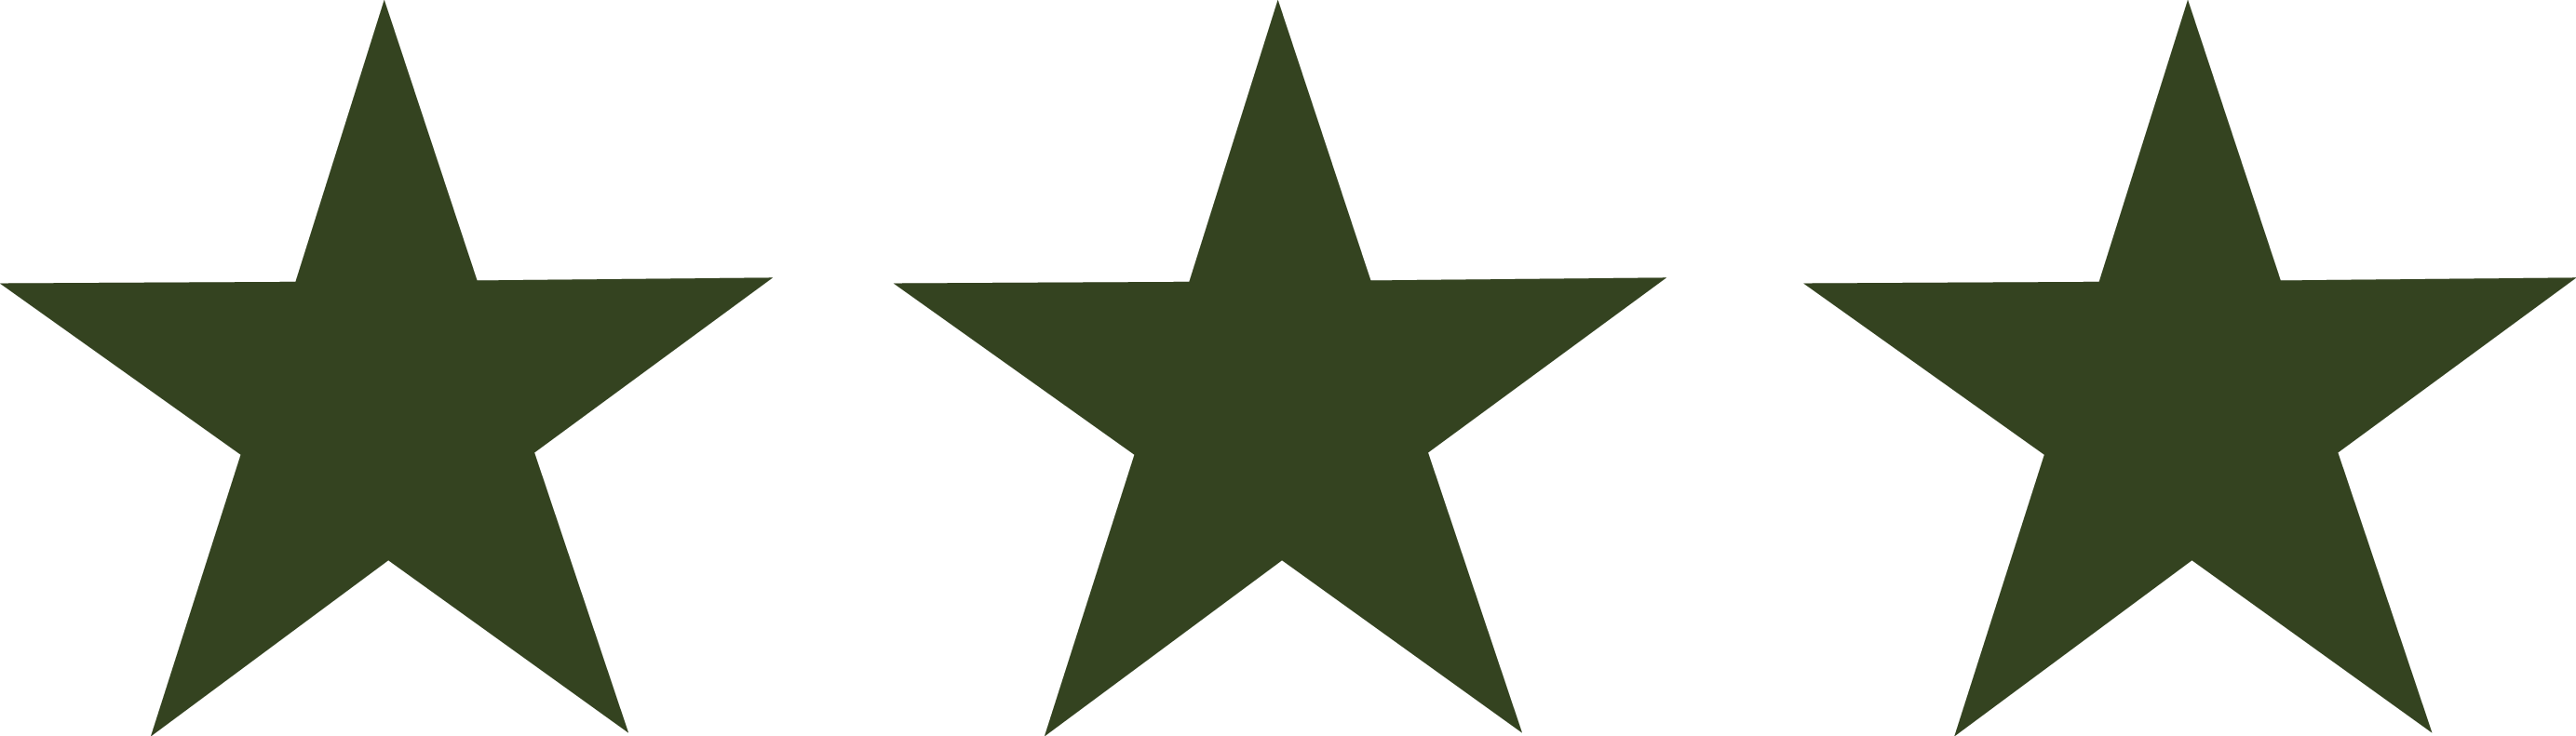 Armed Forces Logos Clip Art - Army Stars Png (2767x791)